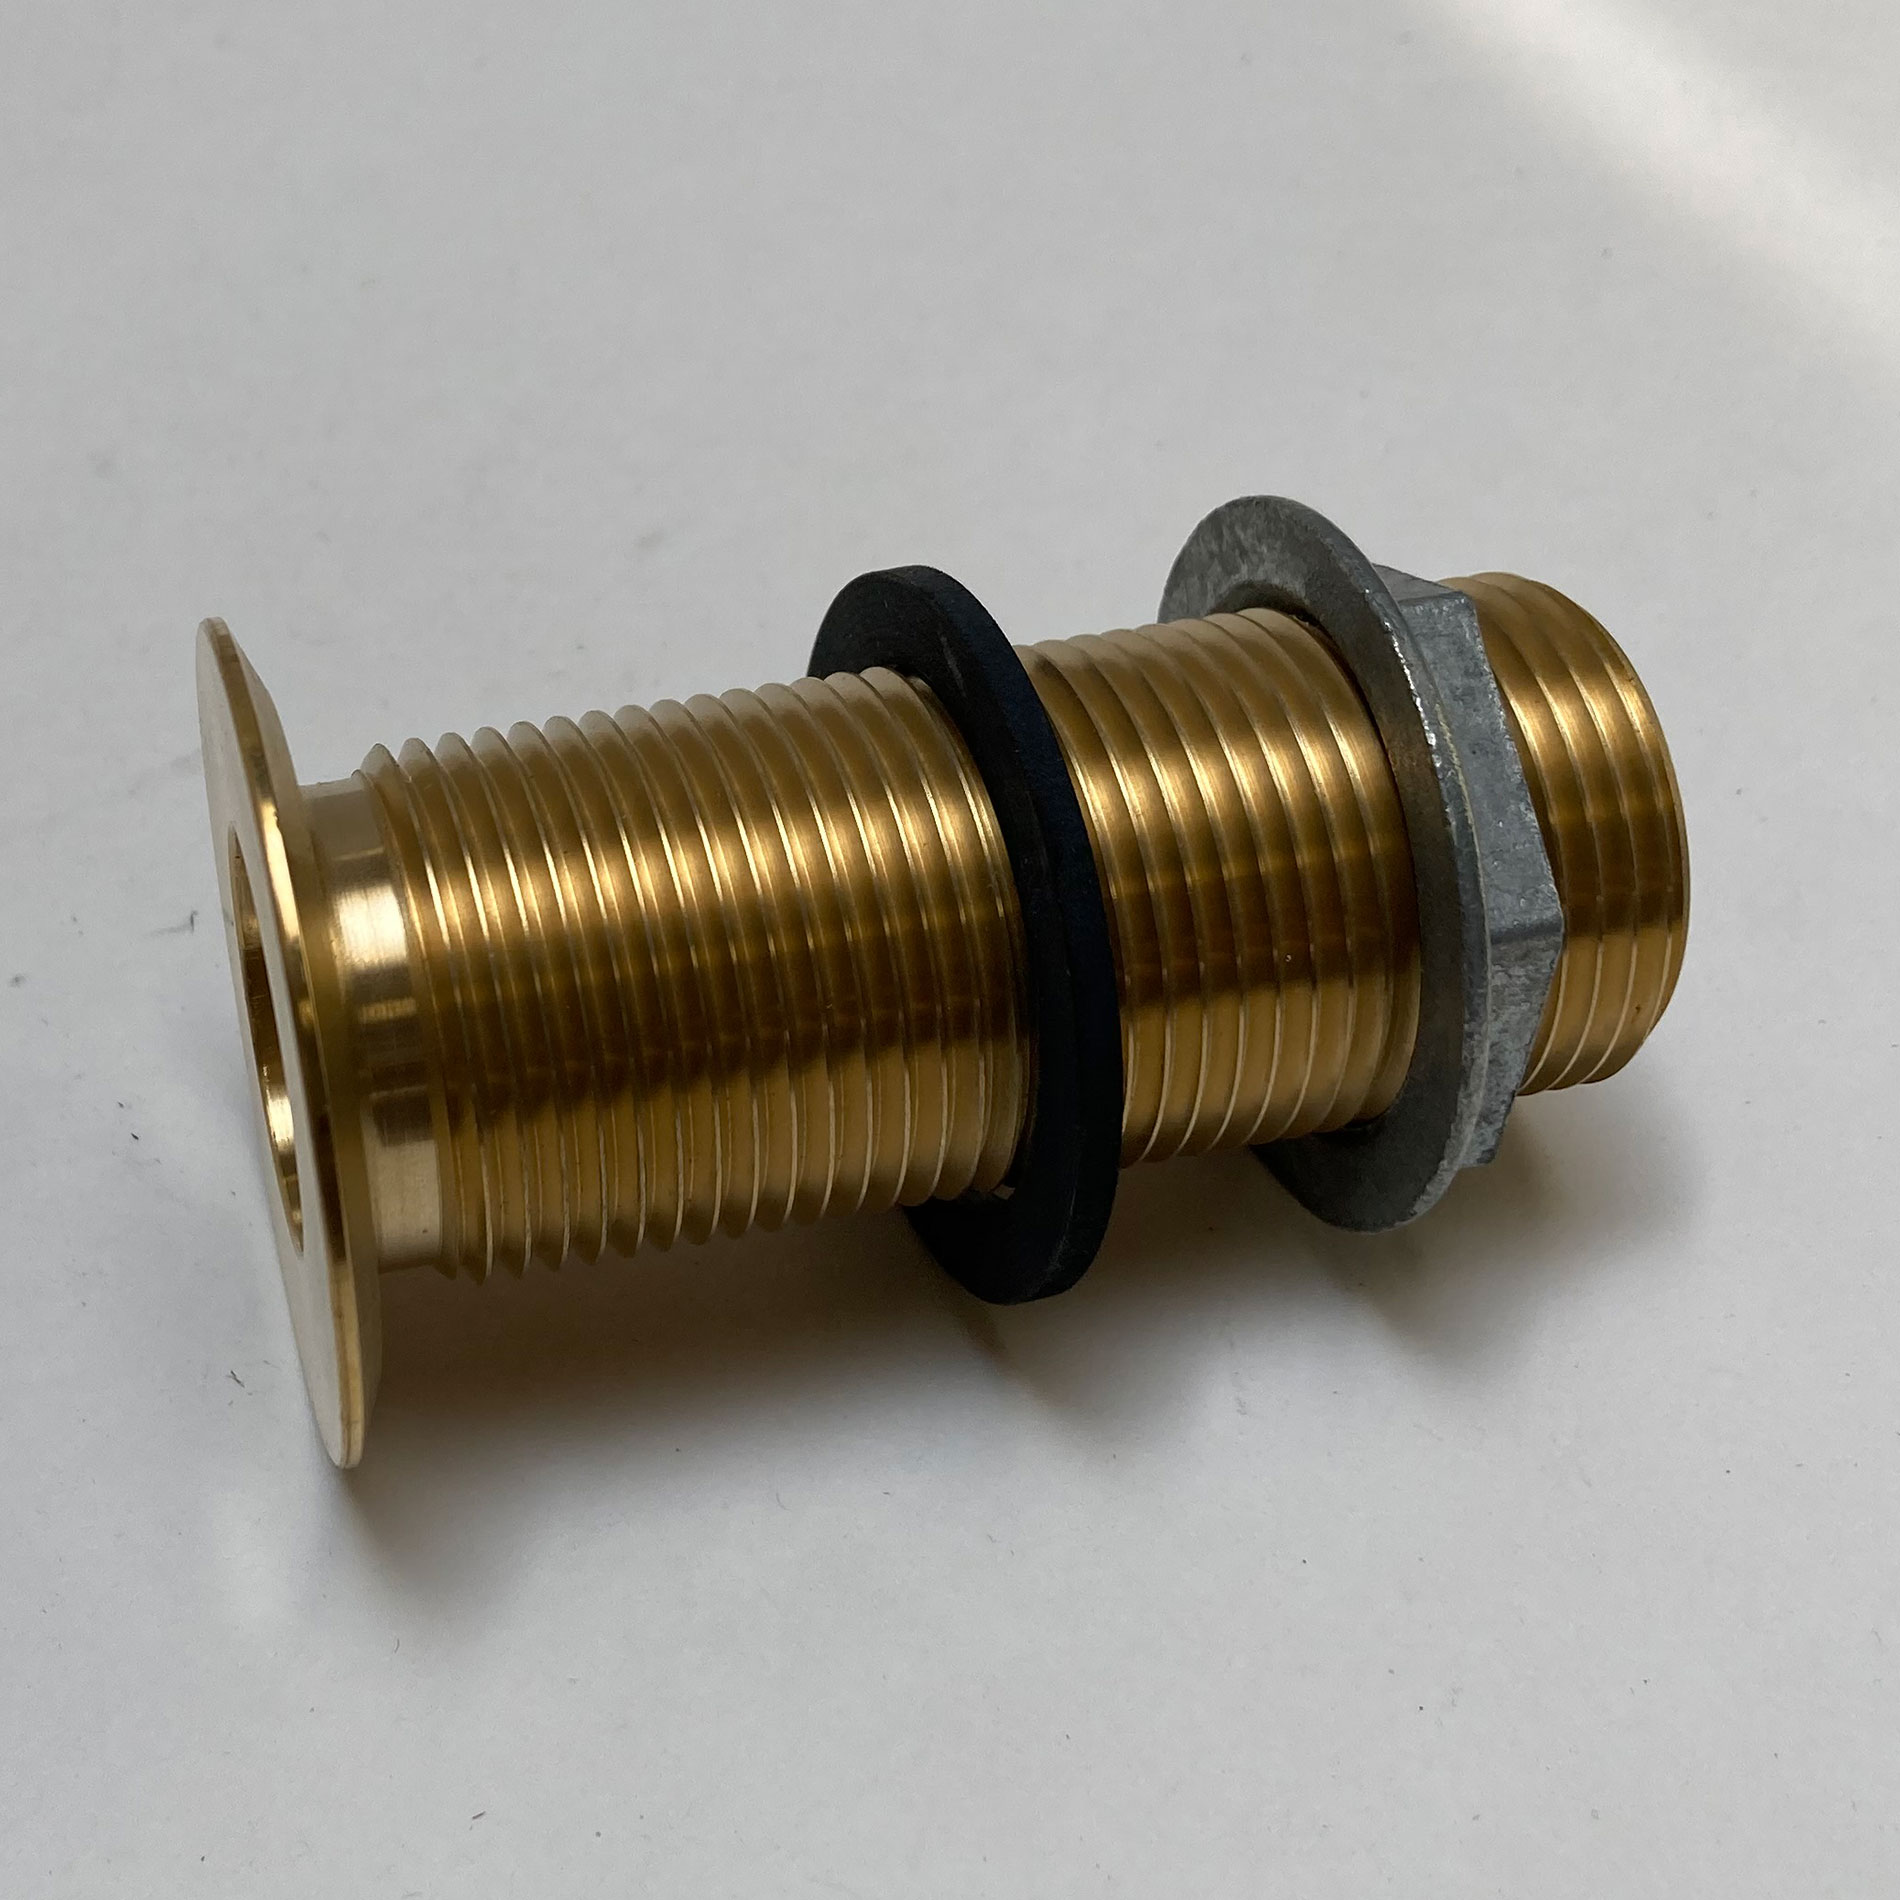 Brass Waste Drain with Locknut and Rubber Washer, #24-C-image